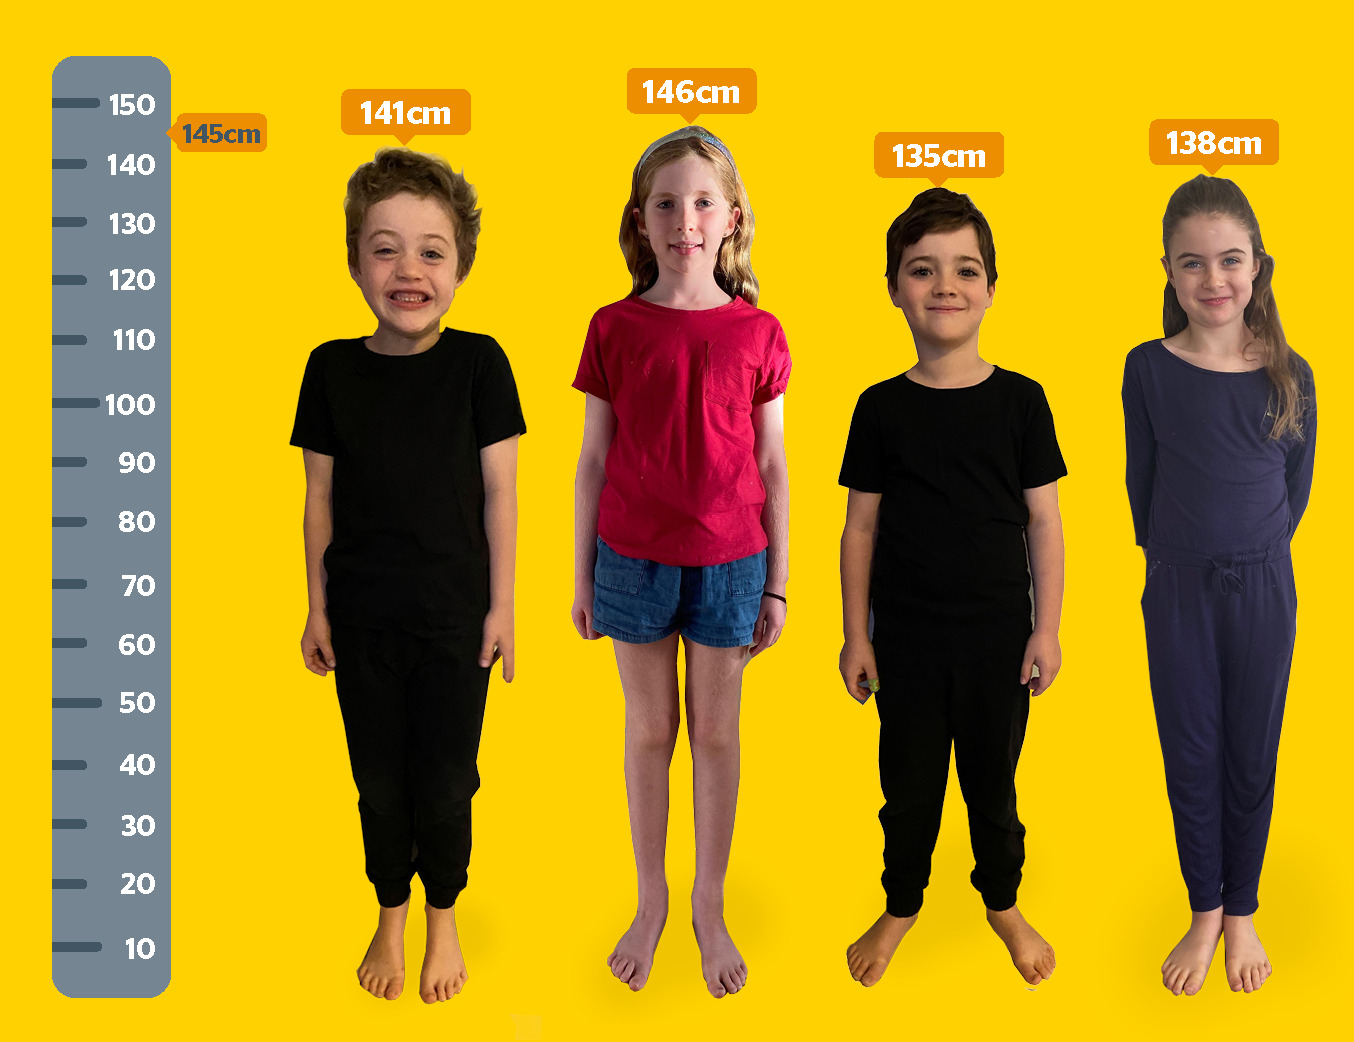 Image of seven year old children and their height measured against 145 centimetres